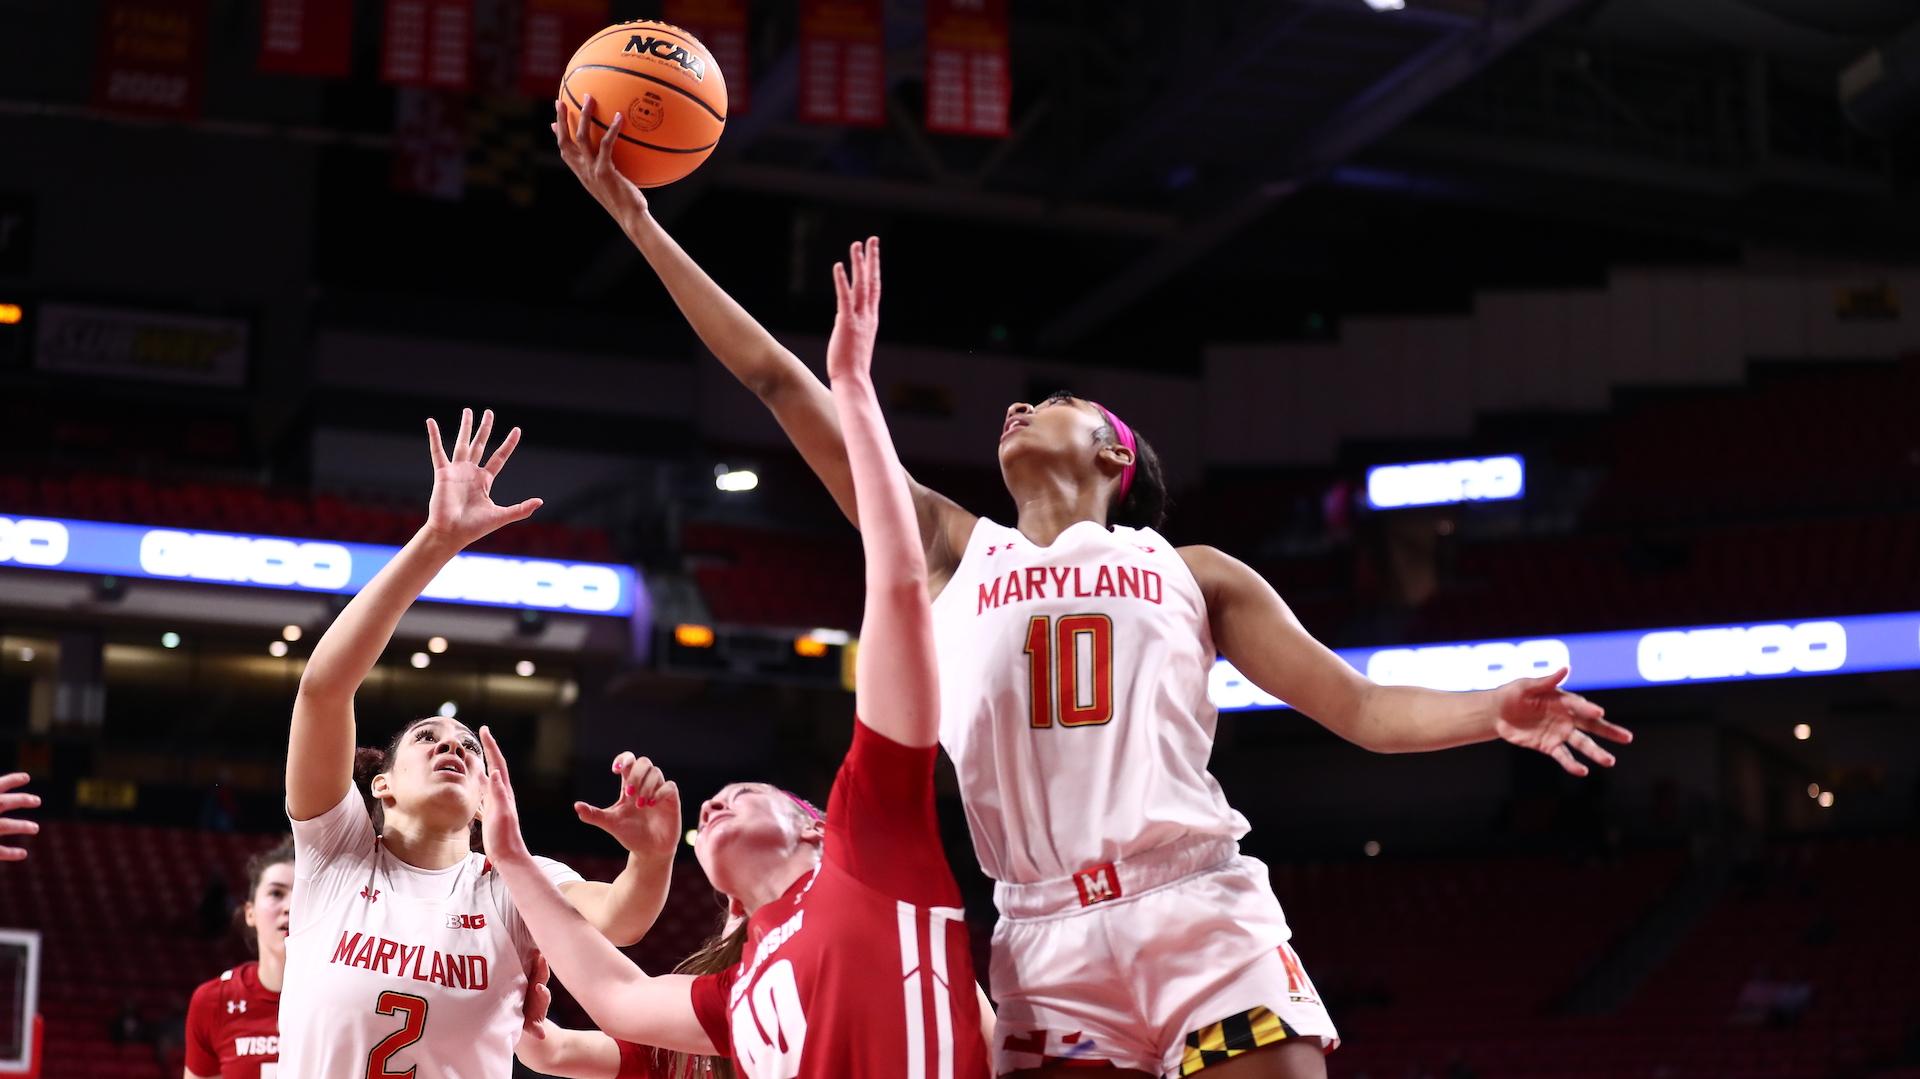 No Terps Blow Out Badgers University Of Maryland